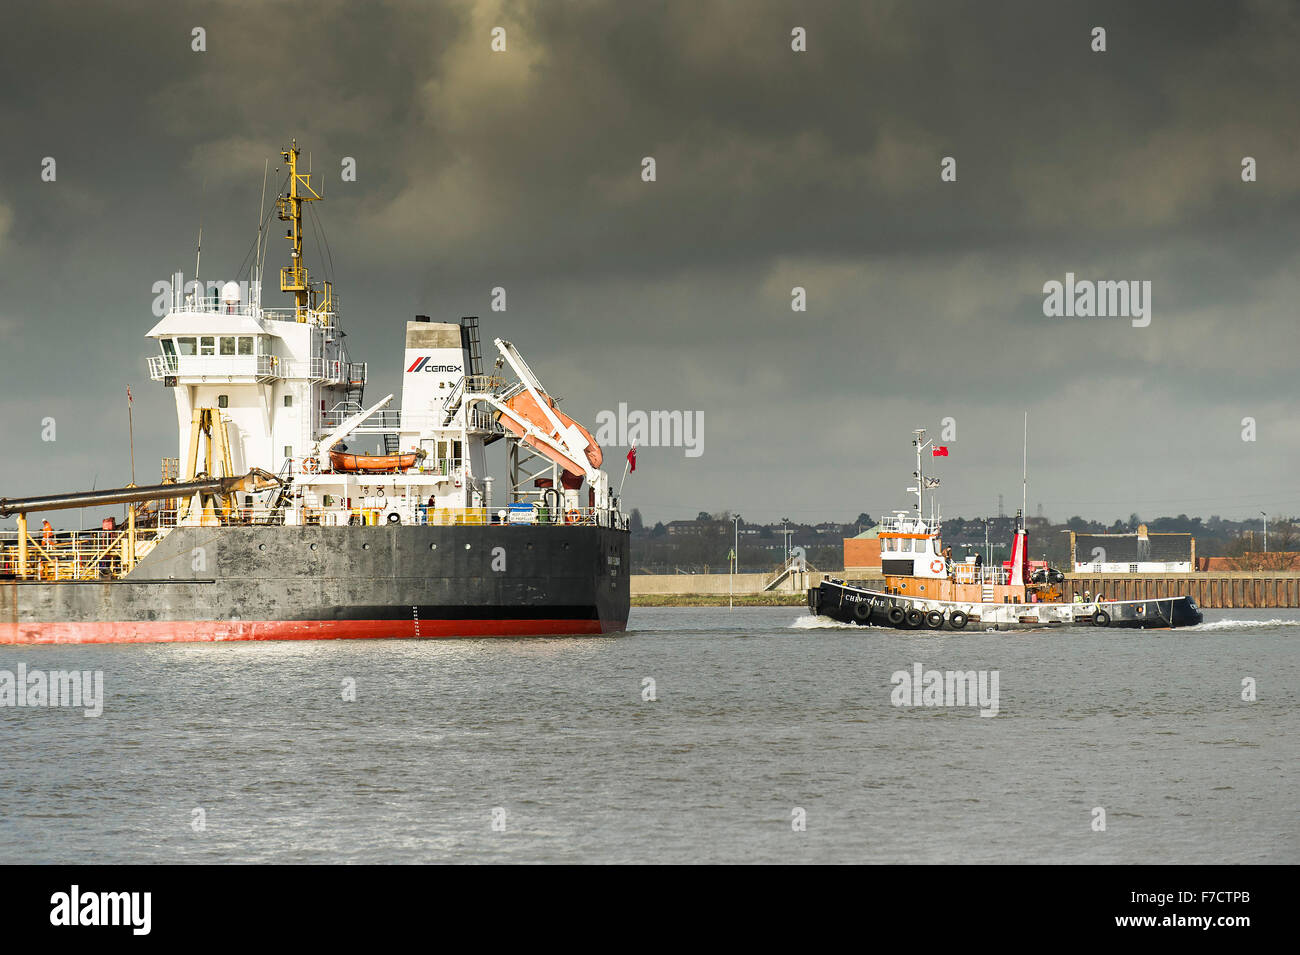 The Hopper dredger Sand Fulmar is escorted by the tug, Christine steaming upriver on the River Thames. Stock Photo